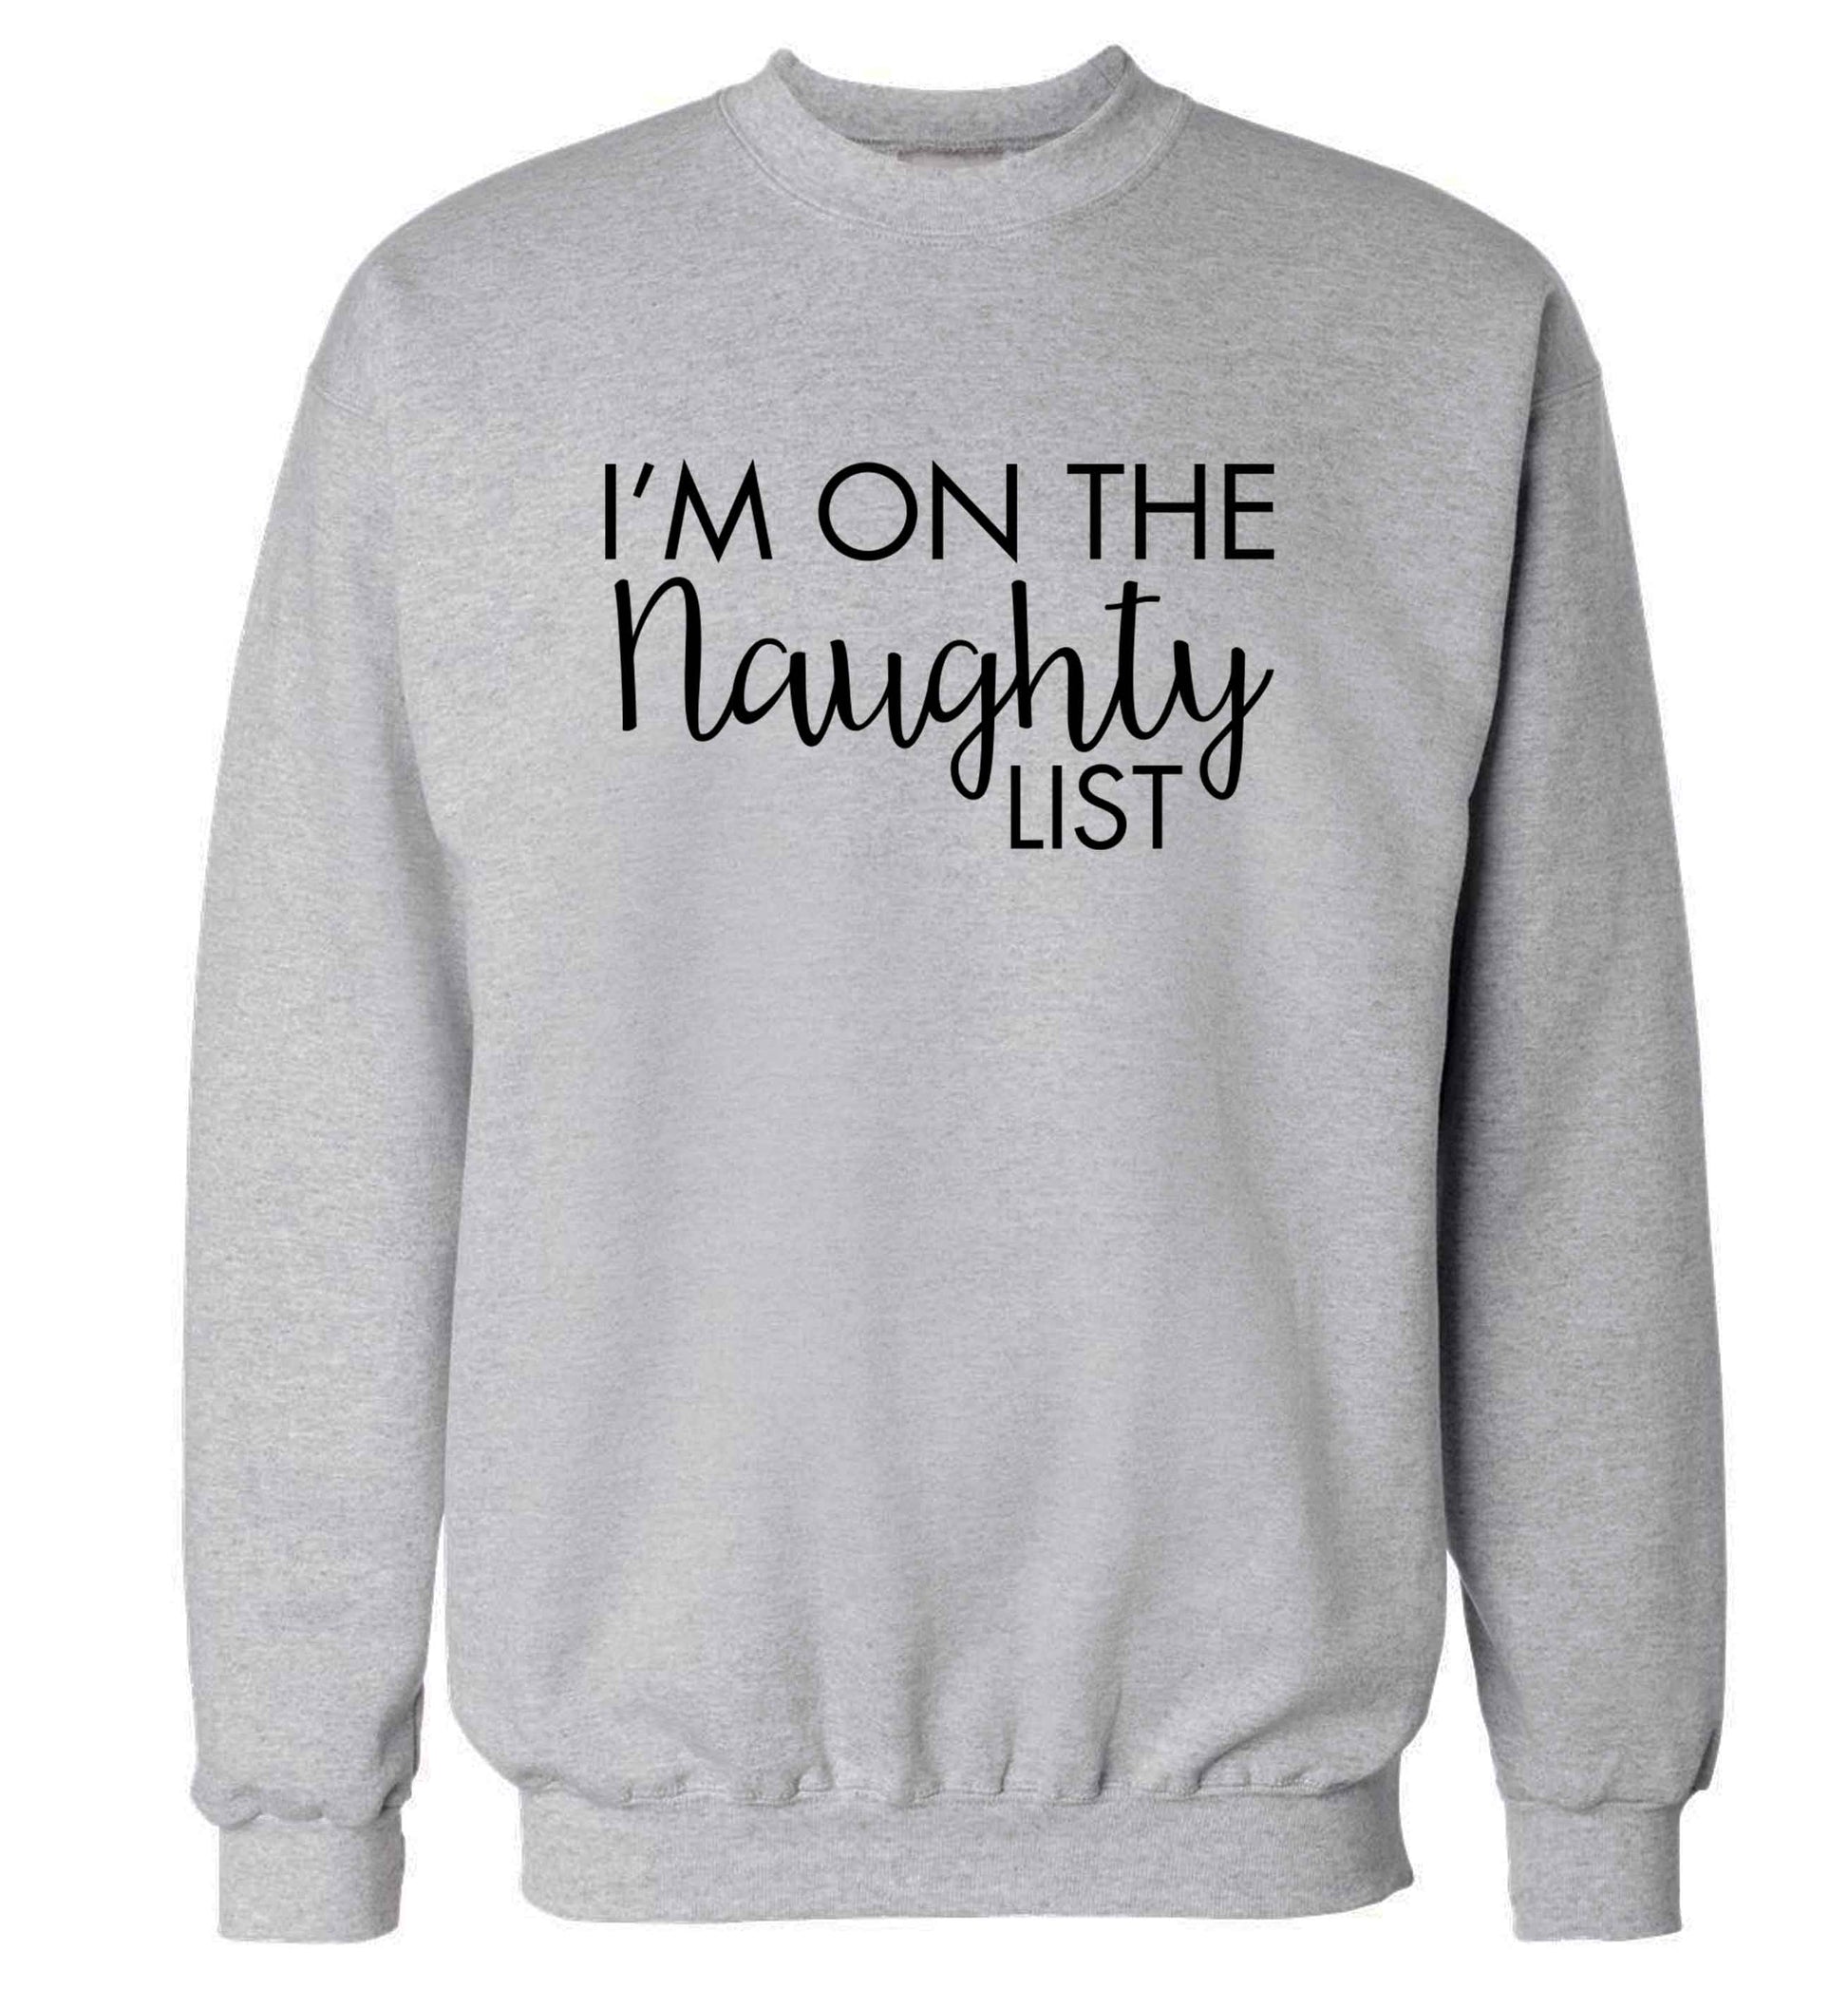 I'm on the naughty list adult's unisex grey sweater 2XL